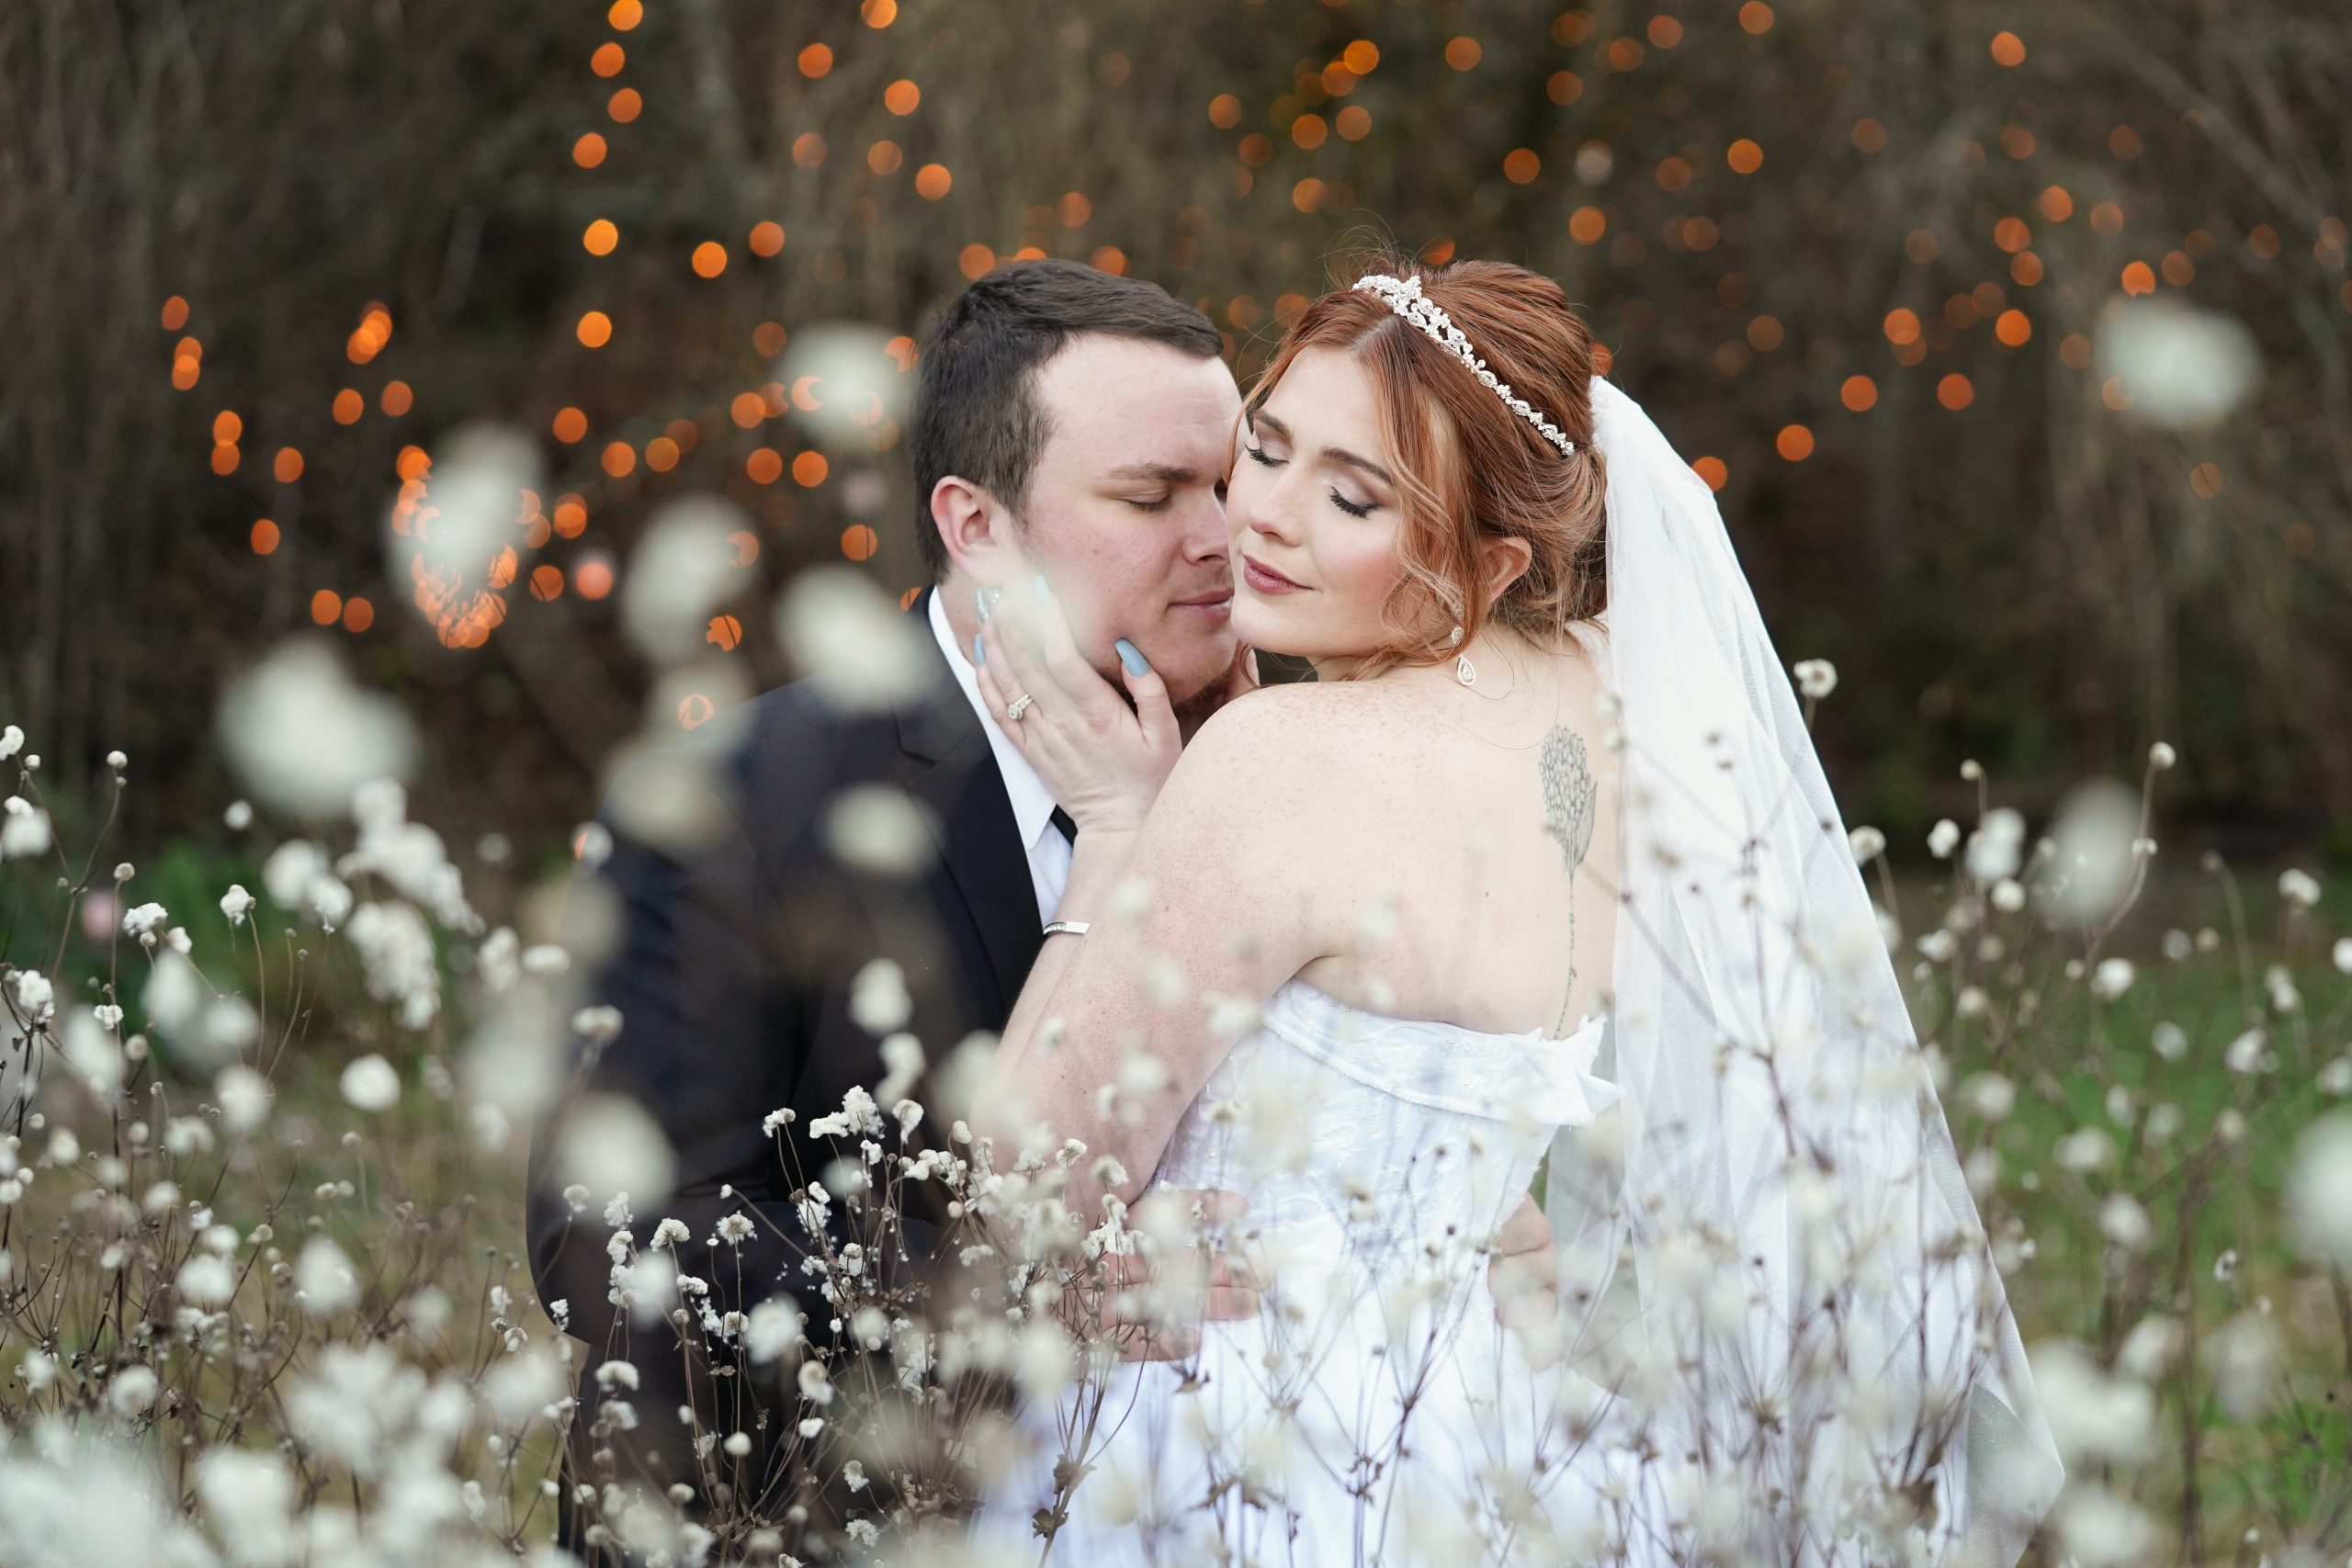 Bride lovingly embracing her groom in front of fluffy white fall seeds near a willow tree with warm fairy lights